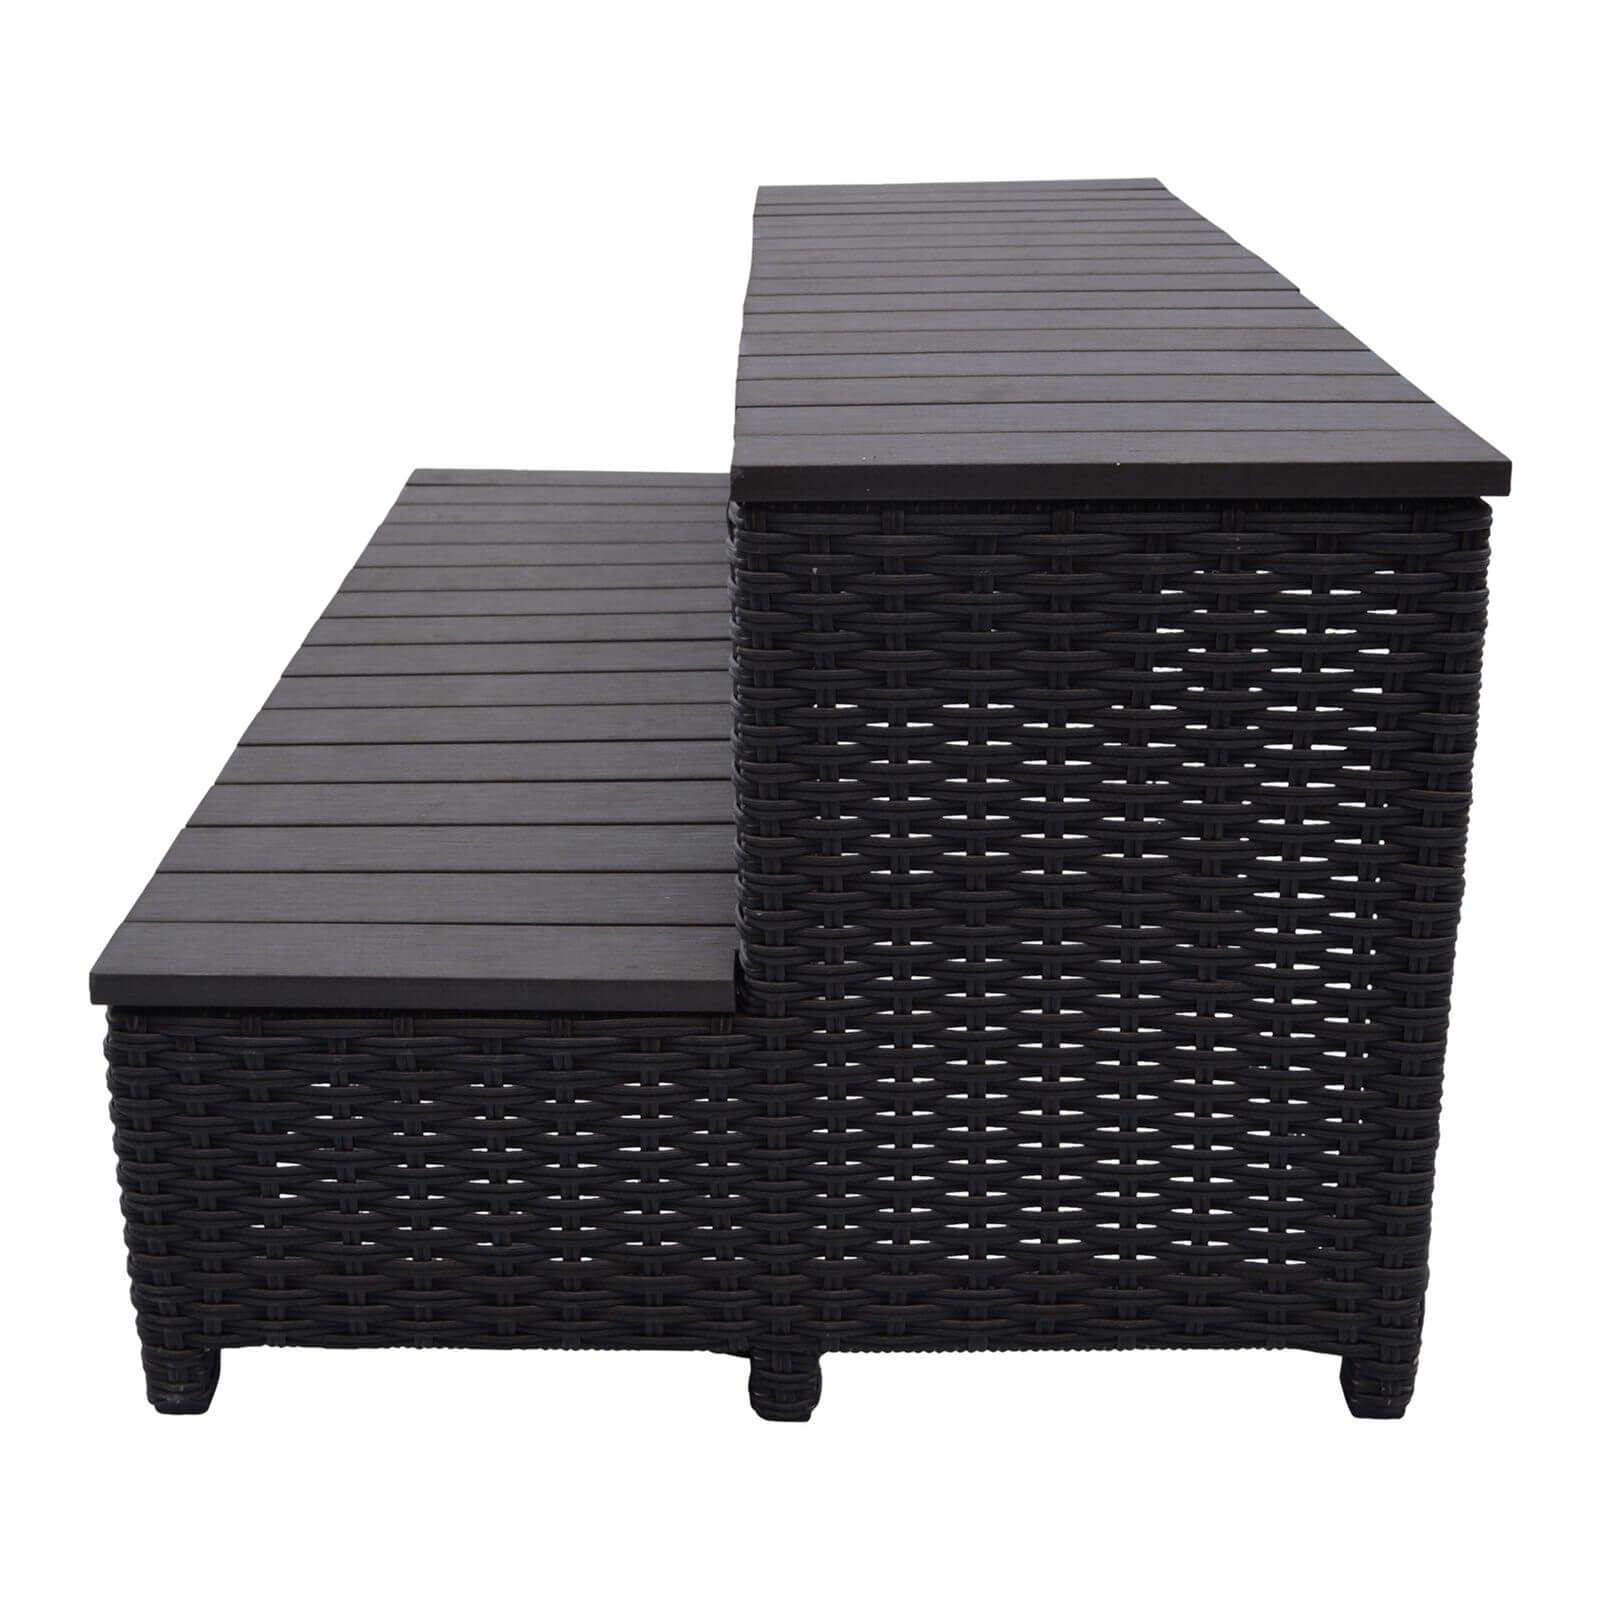 Canadian Spa Rattan Square Spa Step for 86in Hot Tub